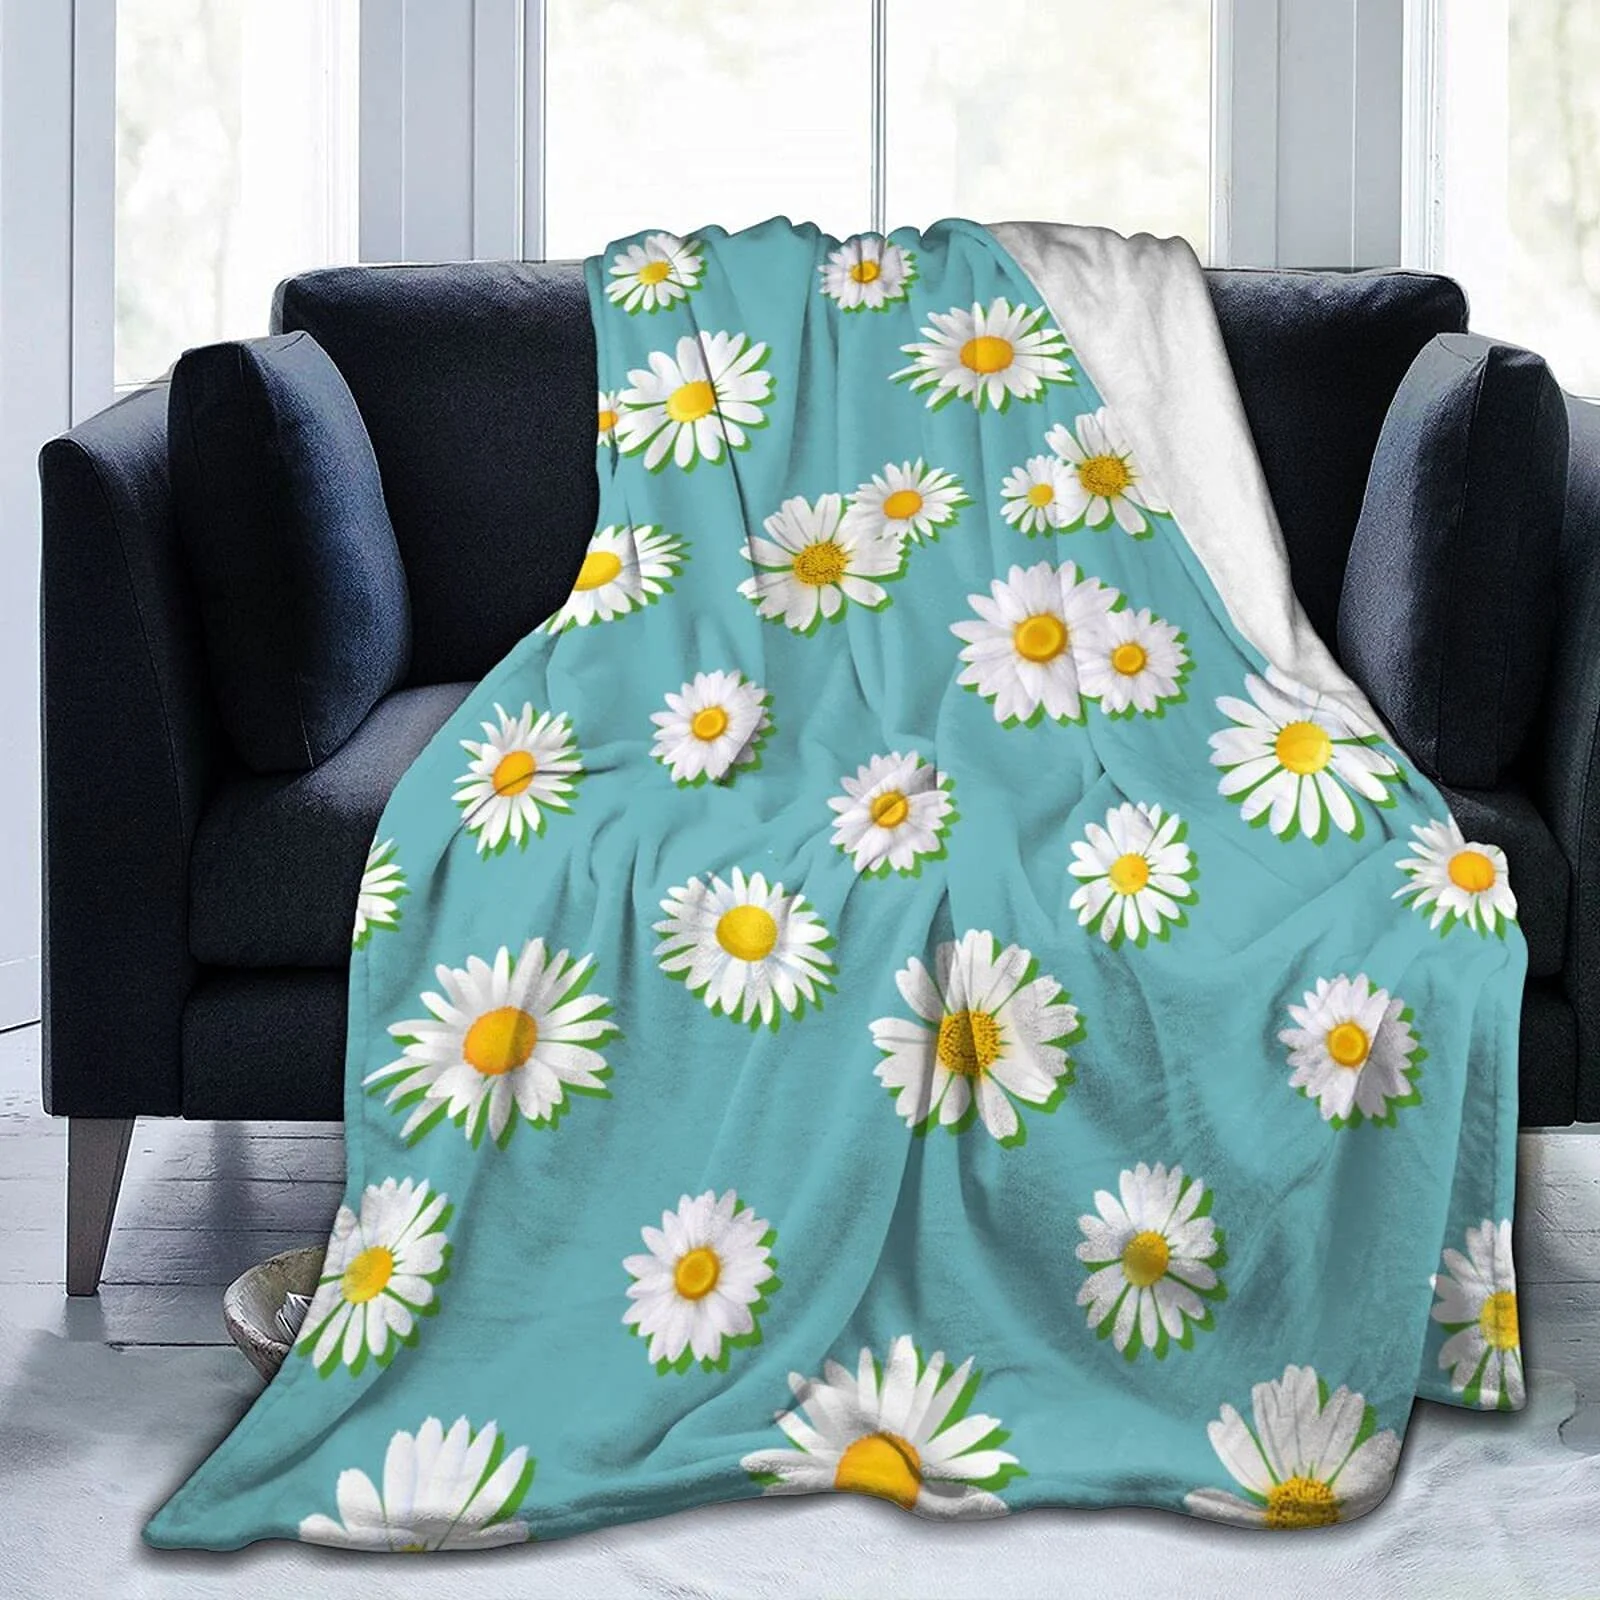 

Blue Daisy Flower Flannel Blanket Bedroom Sheets Living Room Sofa Towel Adult Girl Quilt Gift 60*80 Inches